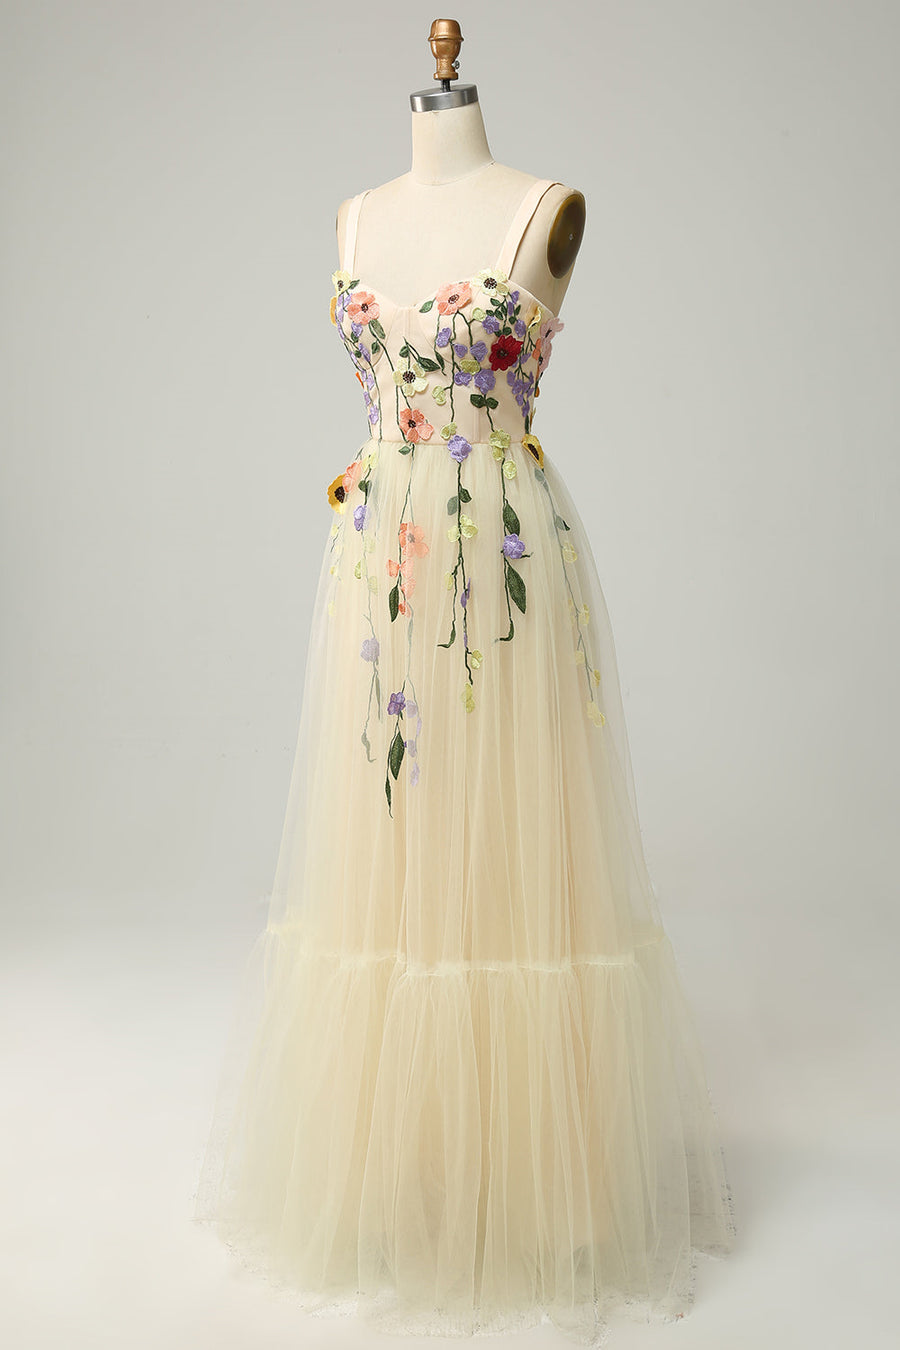 Light Yellow A-line Appliques Tulle Long Prom Dress